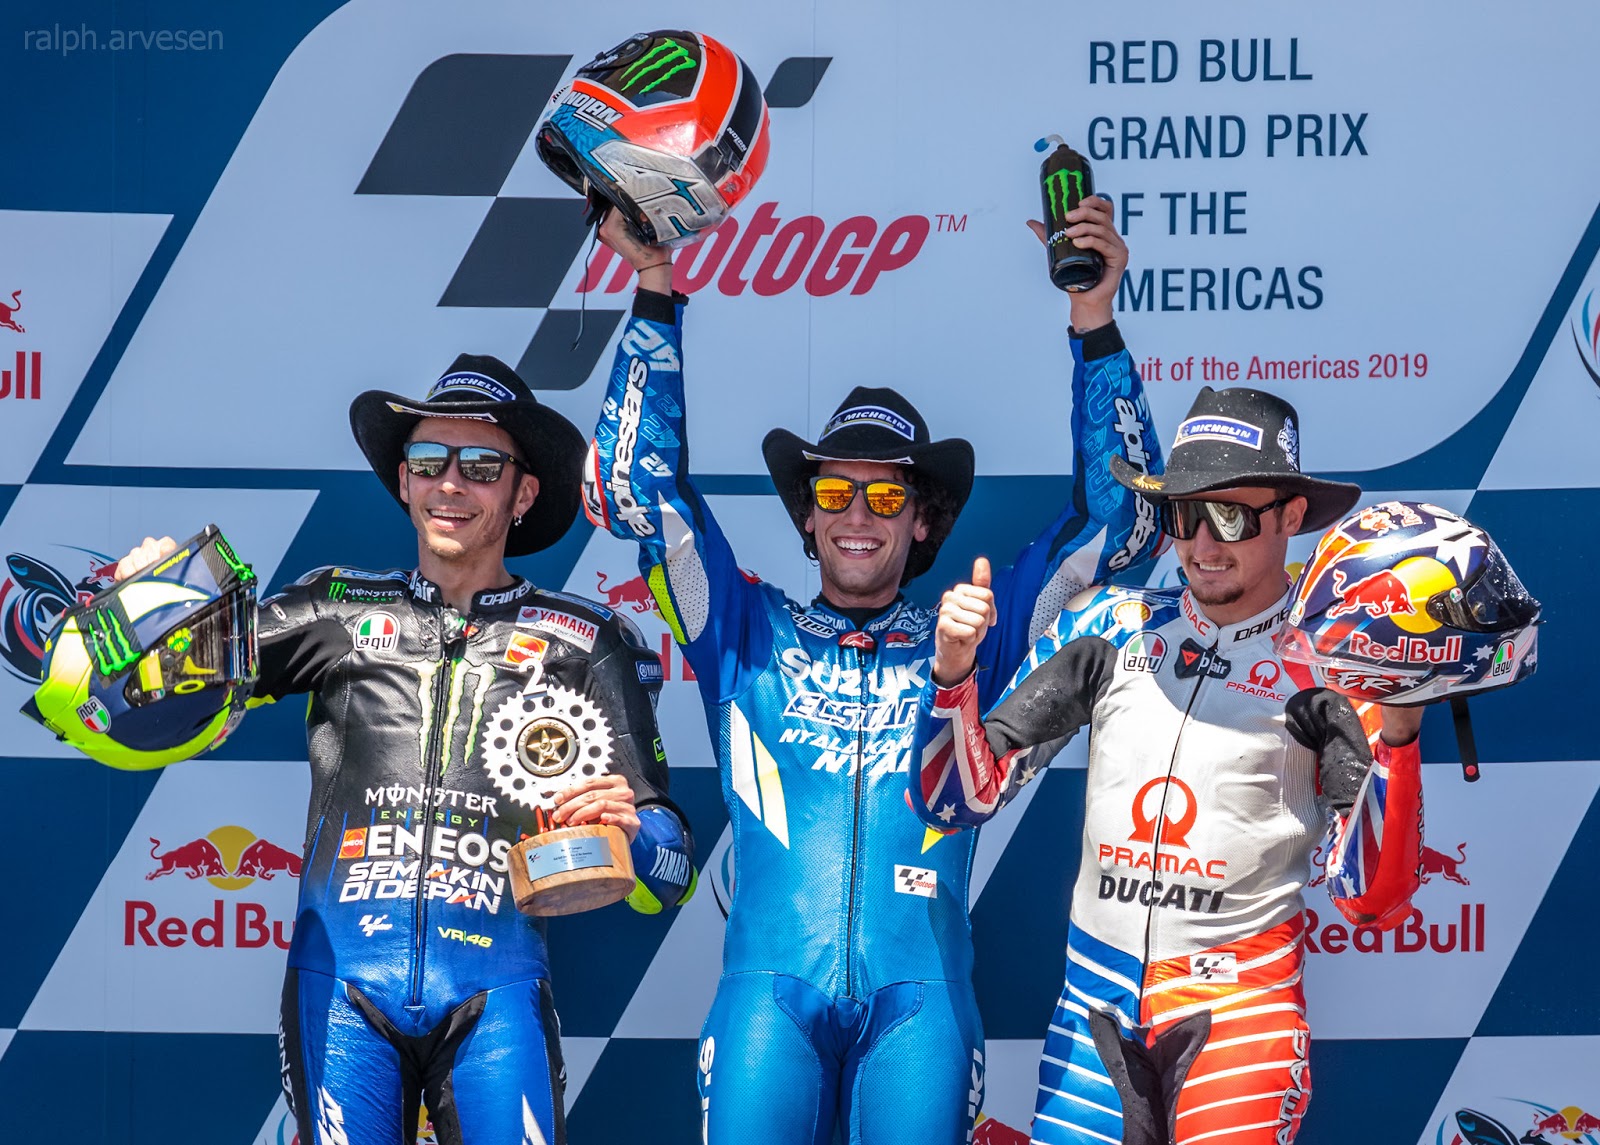 Red Bull Grand Prix of the Americas | Texas Review | Ralph Arvesen